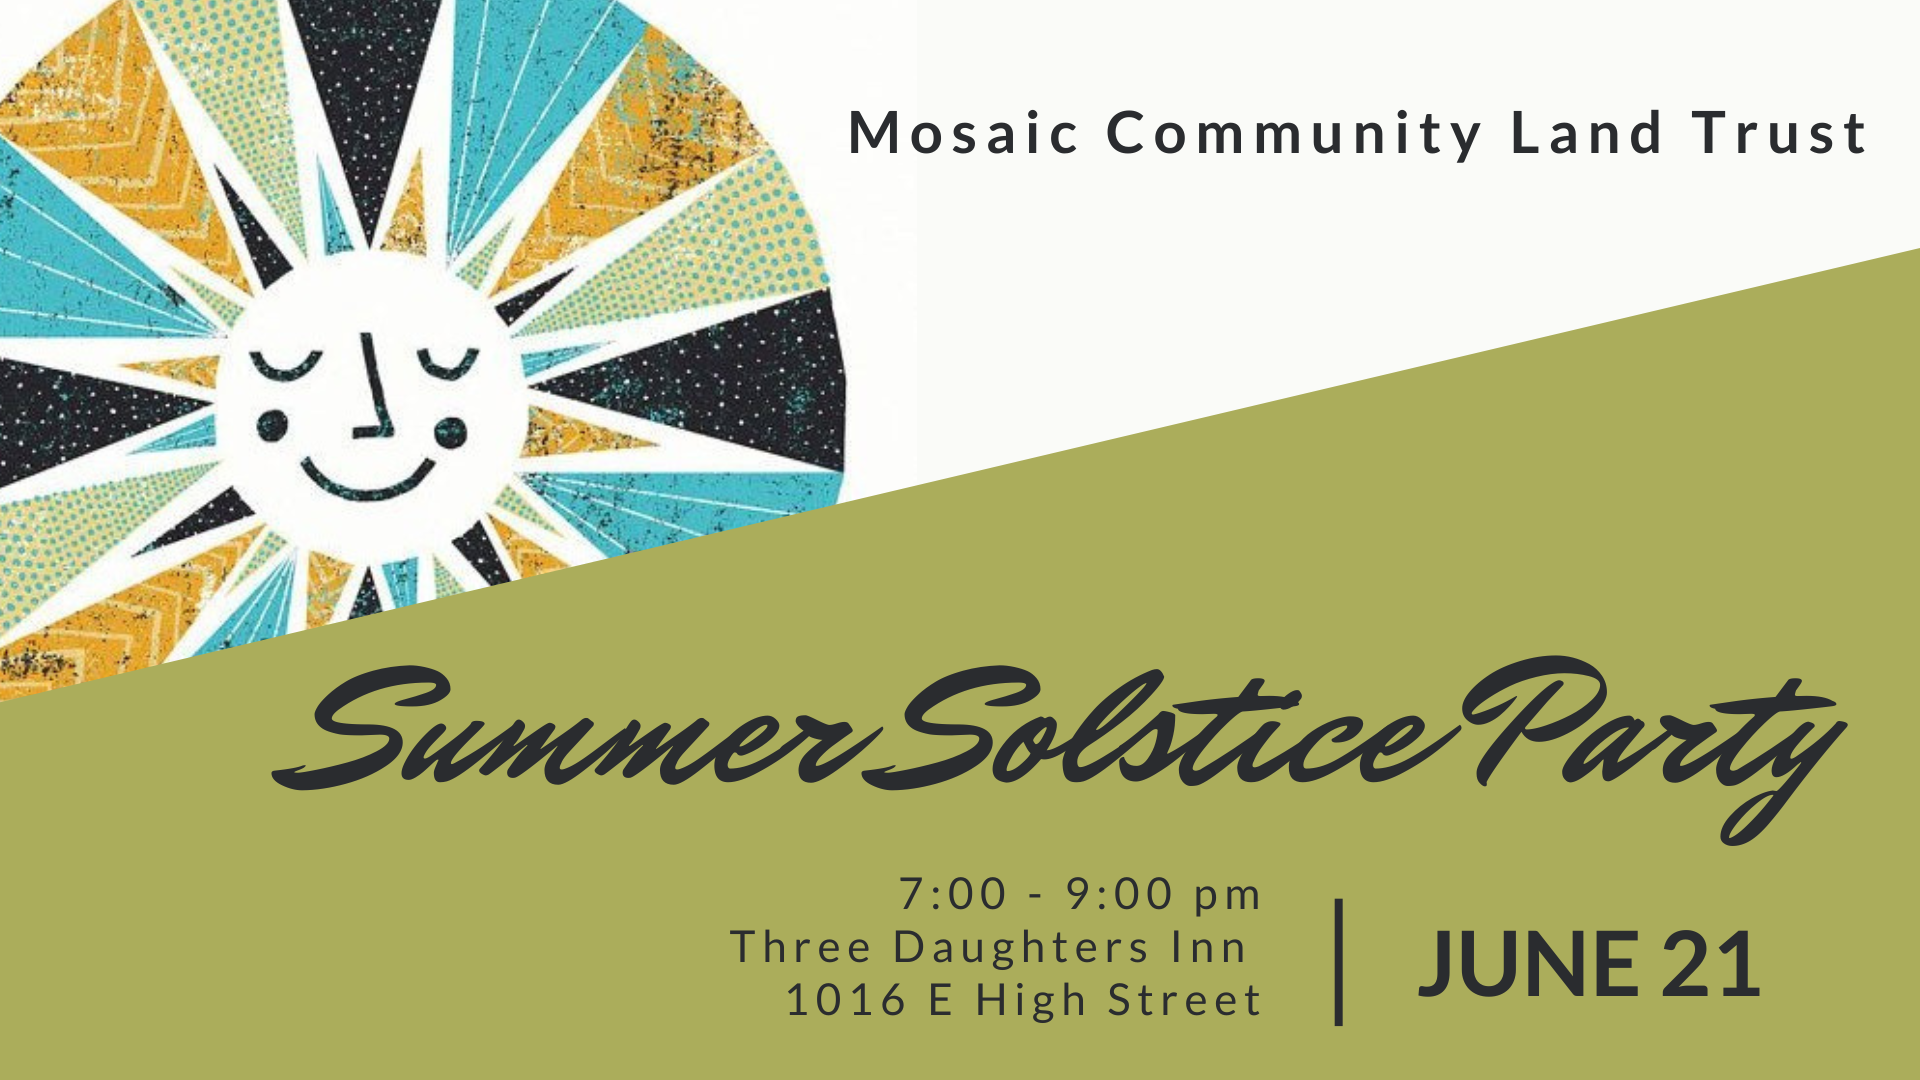 Summer Solstice Party